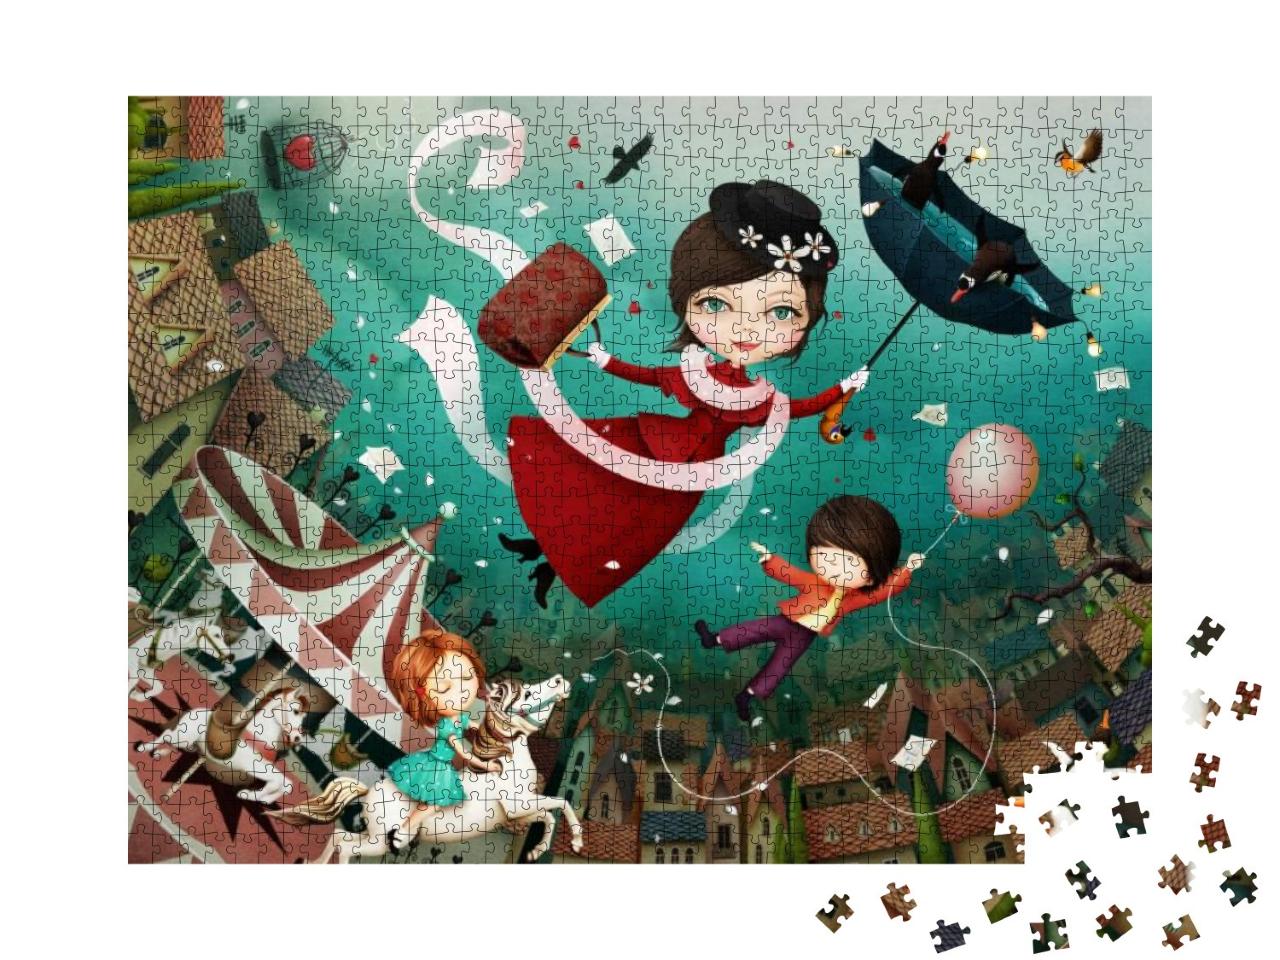 3D Image, Bright Fairytale Illustration Based on Tale of... Jigsaw Puzzle with 1000 pieces